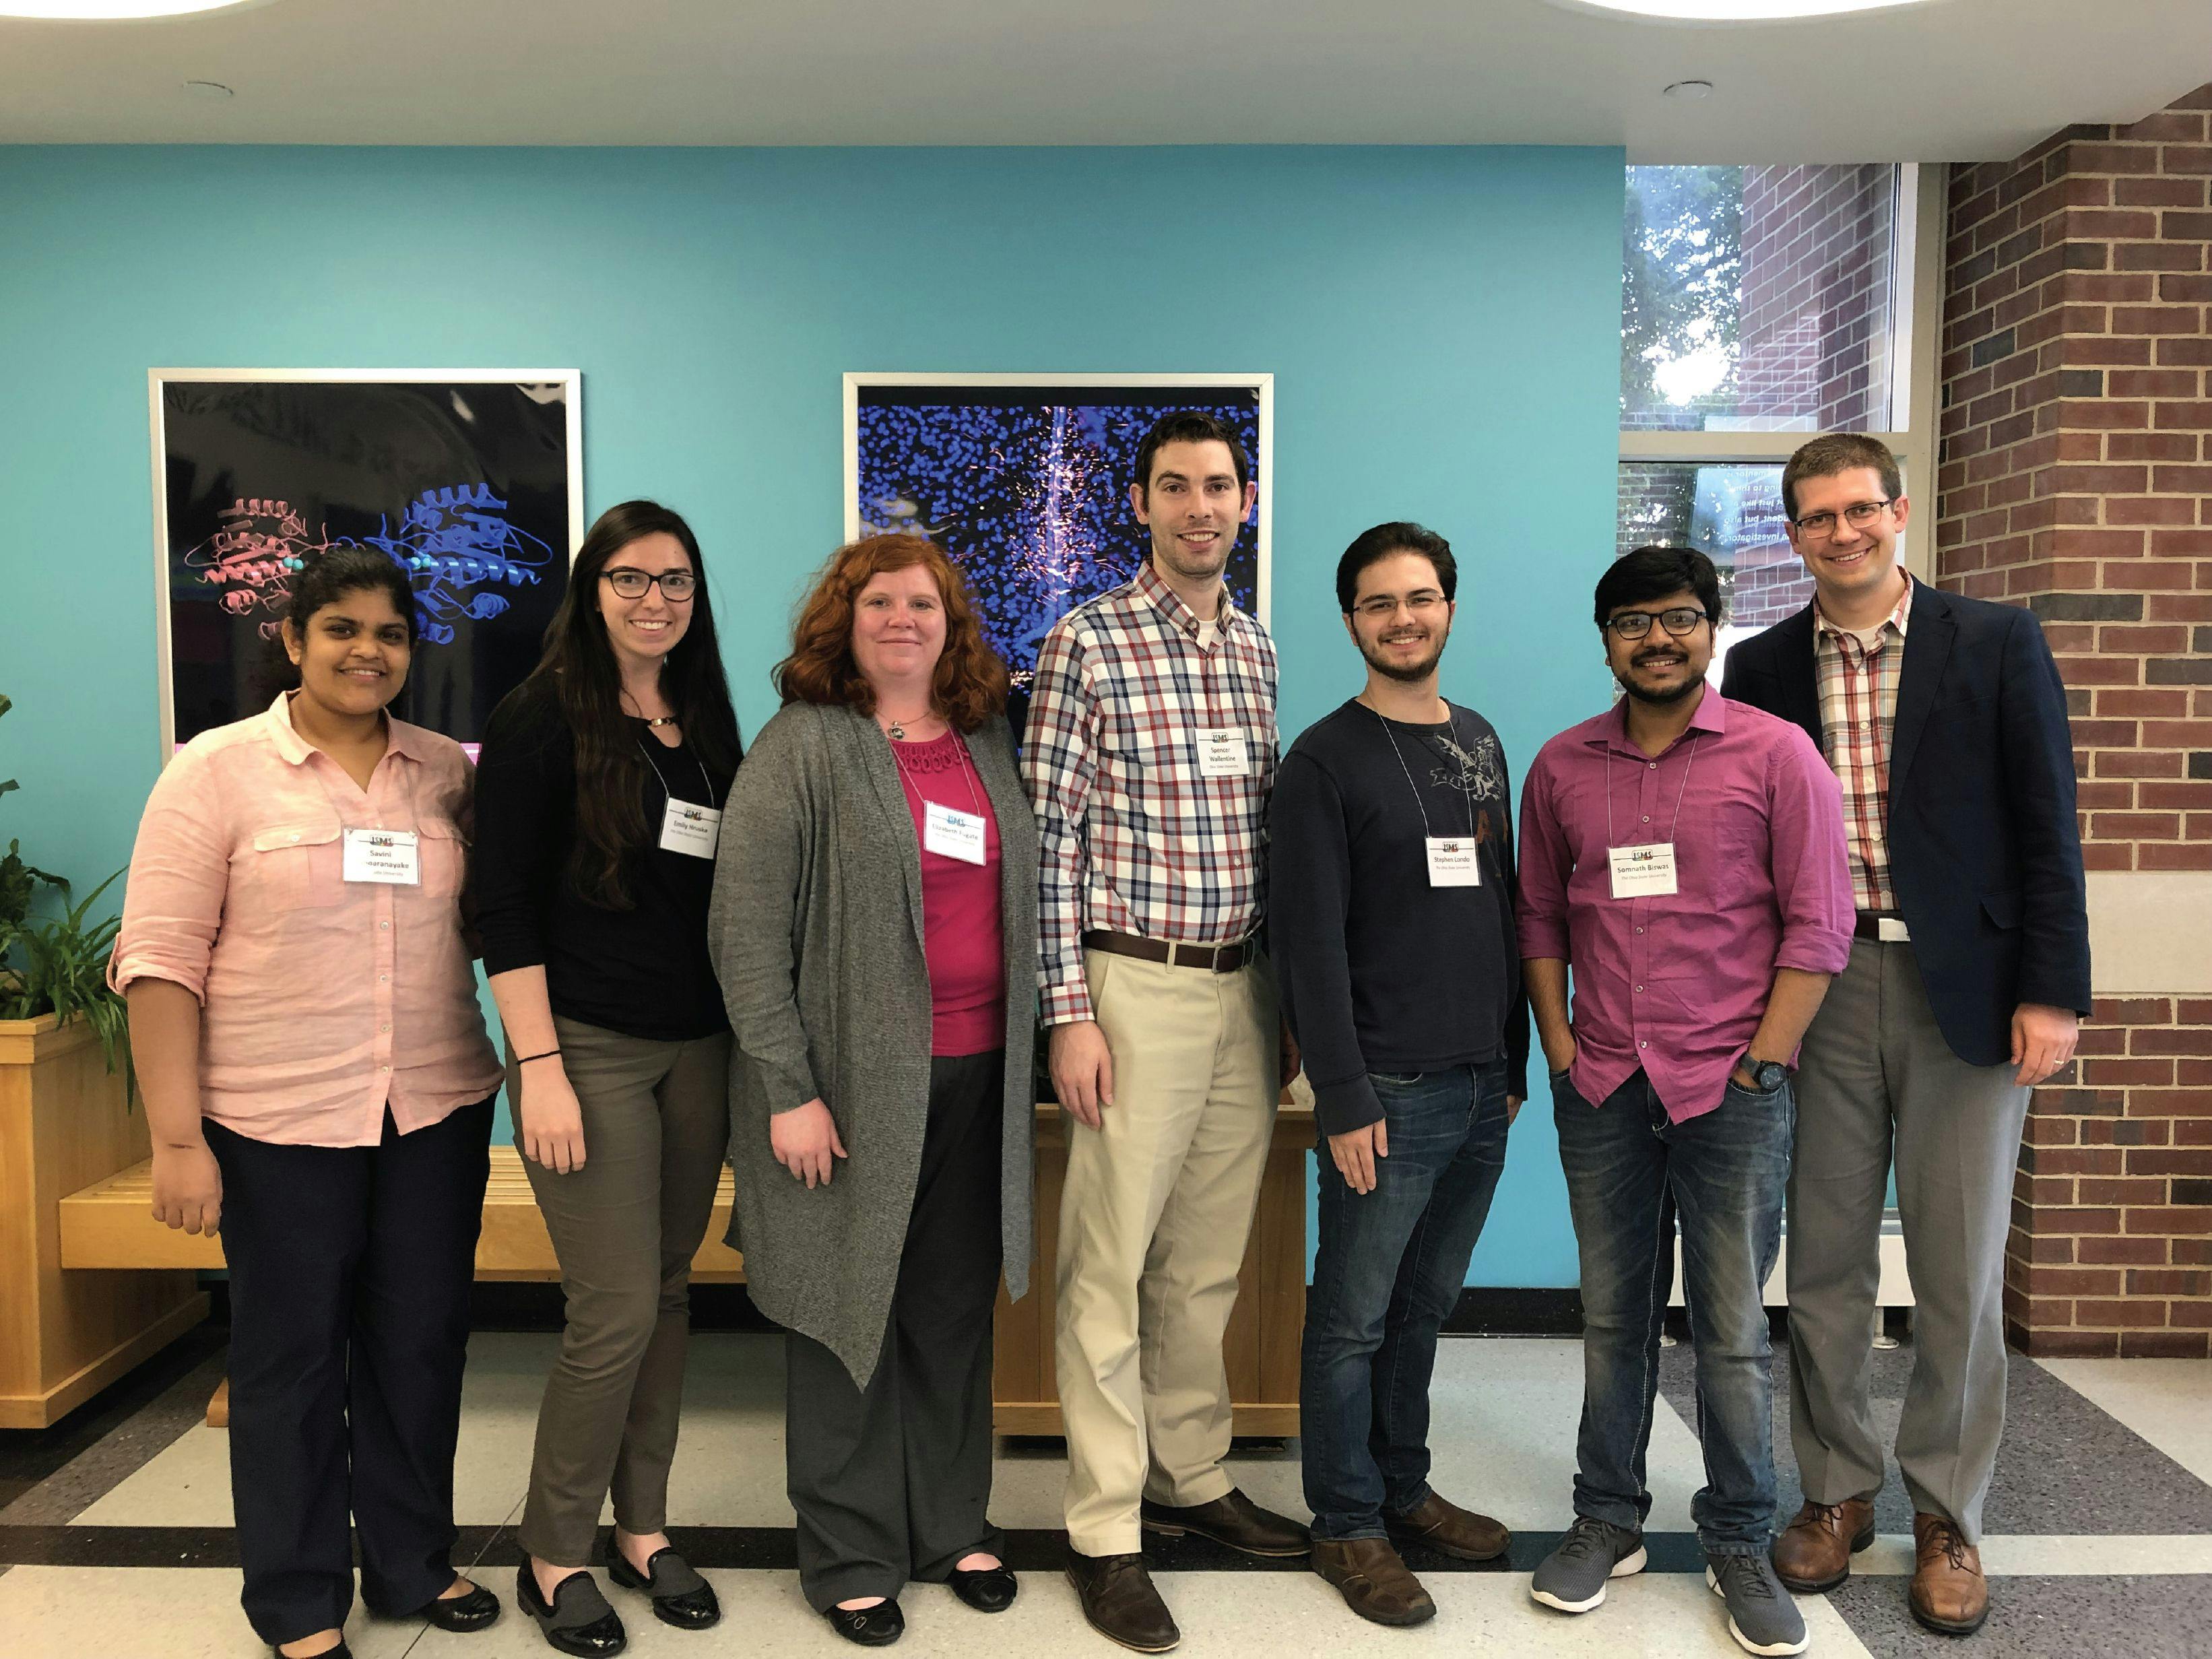 FIGURE 4: Members of the Baker research group present at the International Symposium on Molecular Spectroscopy at University of Illinois, Urbana-Champaign in 2019. Left to right: Savini Bandaranayake, Emily Hruska, Elizabeth Fugate, Spencer Wallentine, Stephen Londo, Somnath Biswas, and L. Robert Baker.